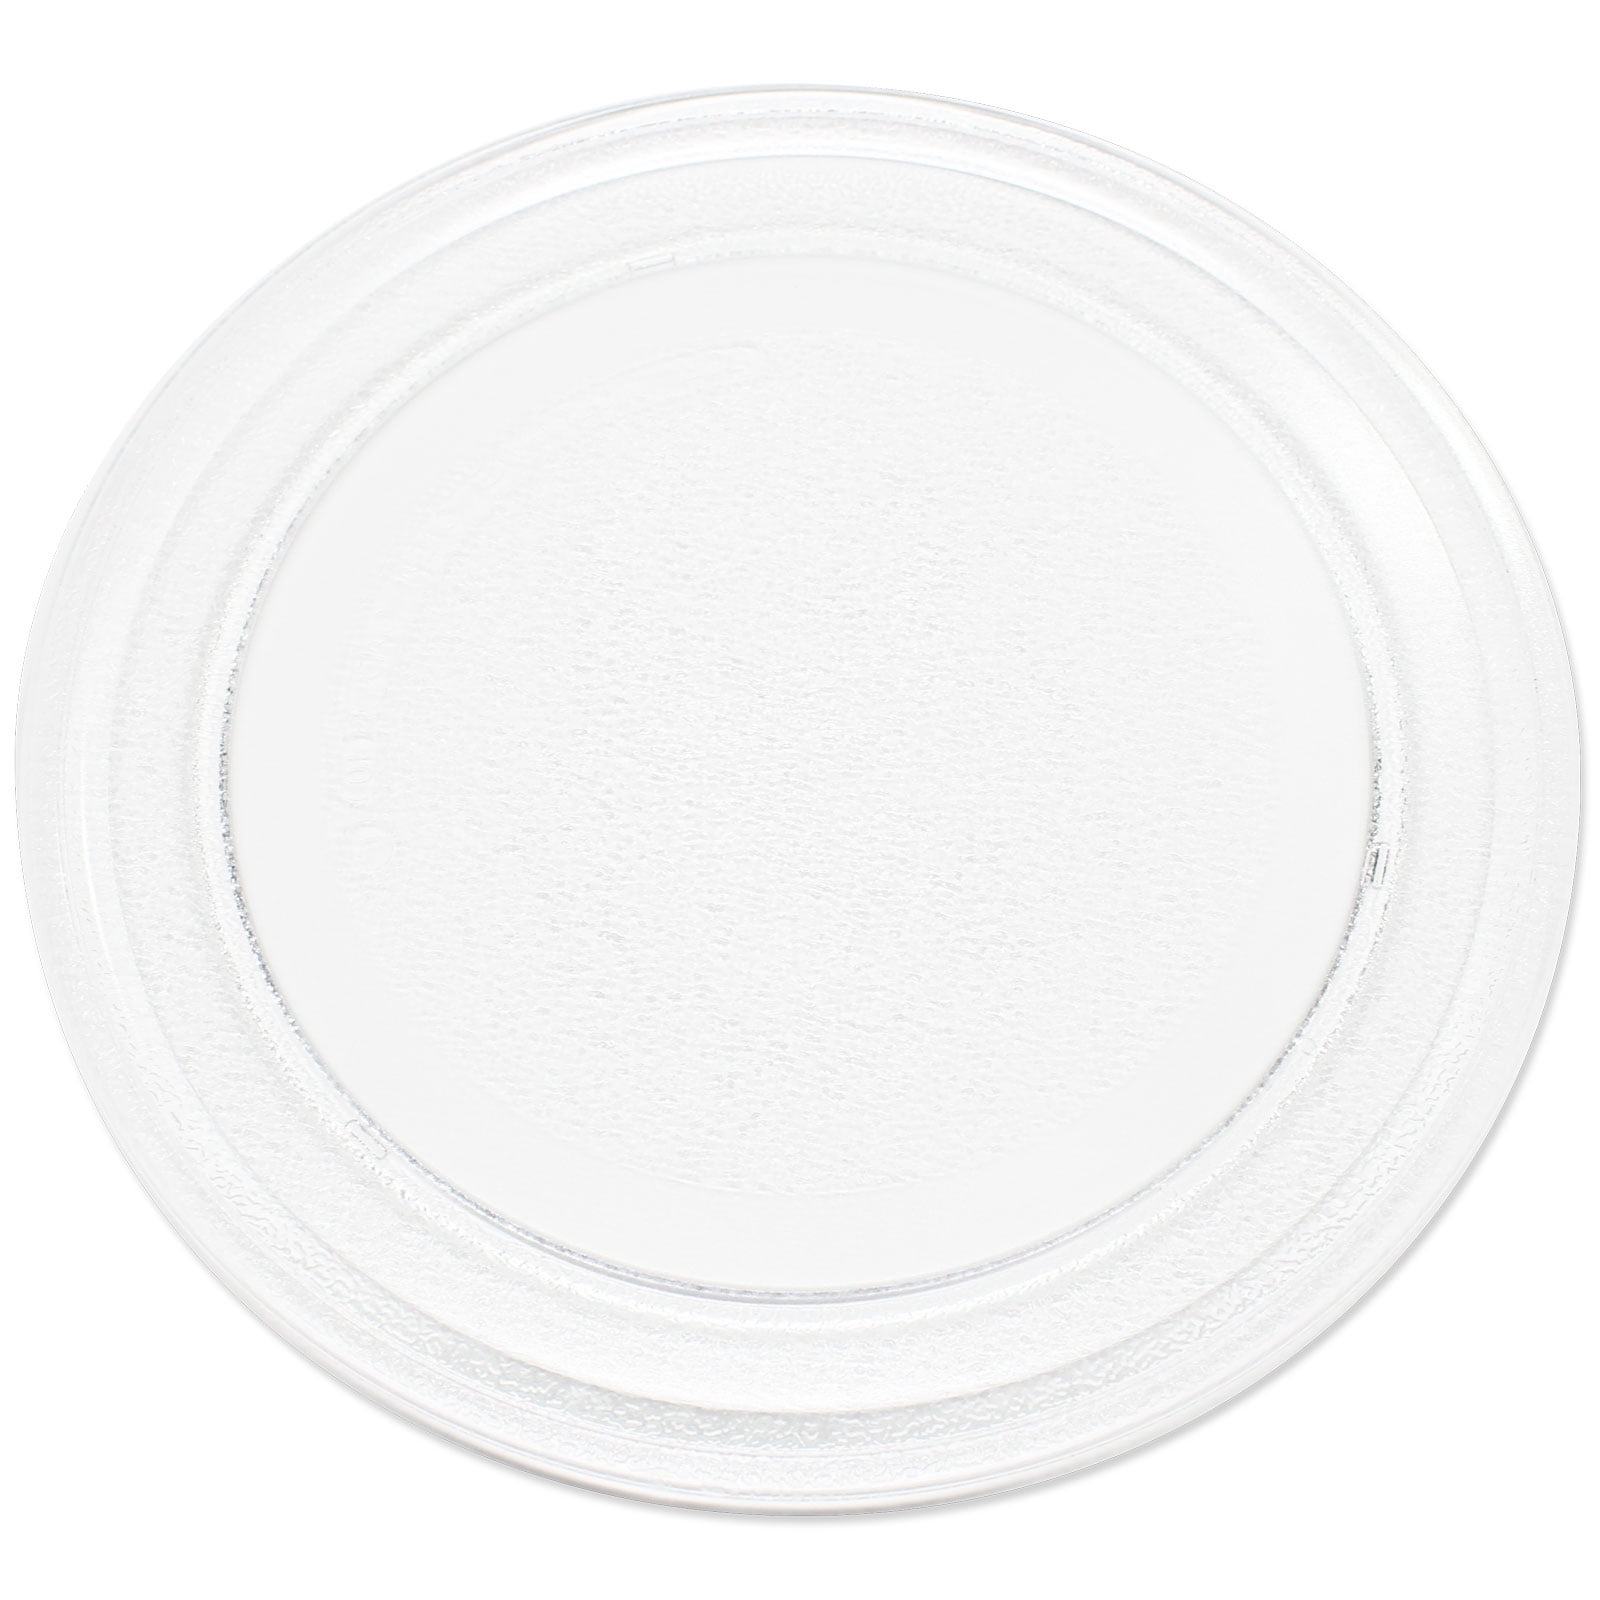 VIOKS Microwave Plate Round Glass Plate Turntable Replacement Plate 245 mm 